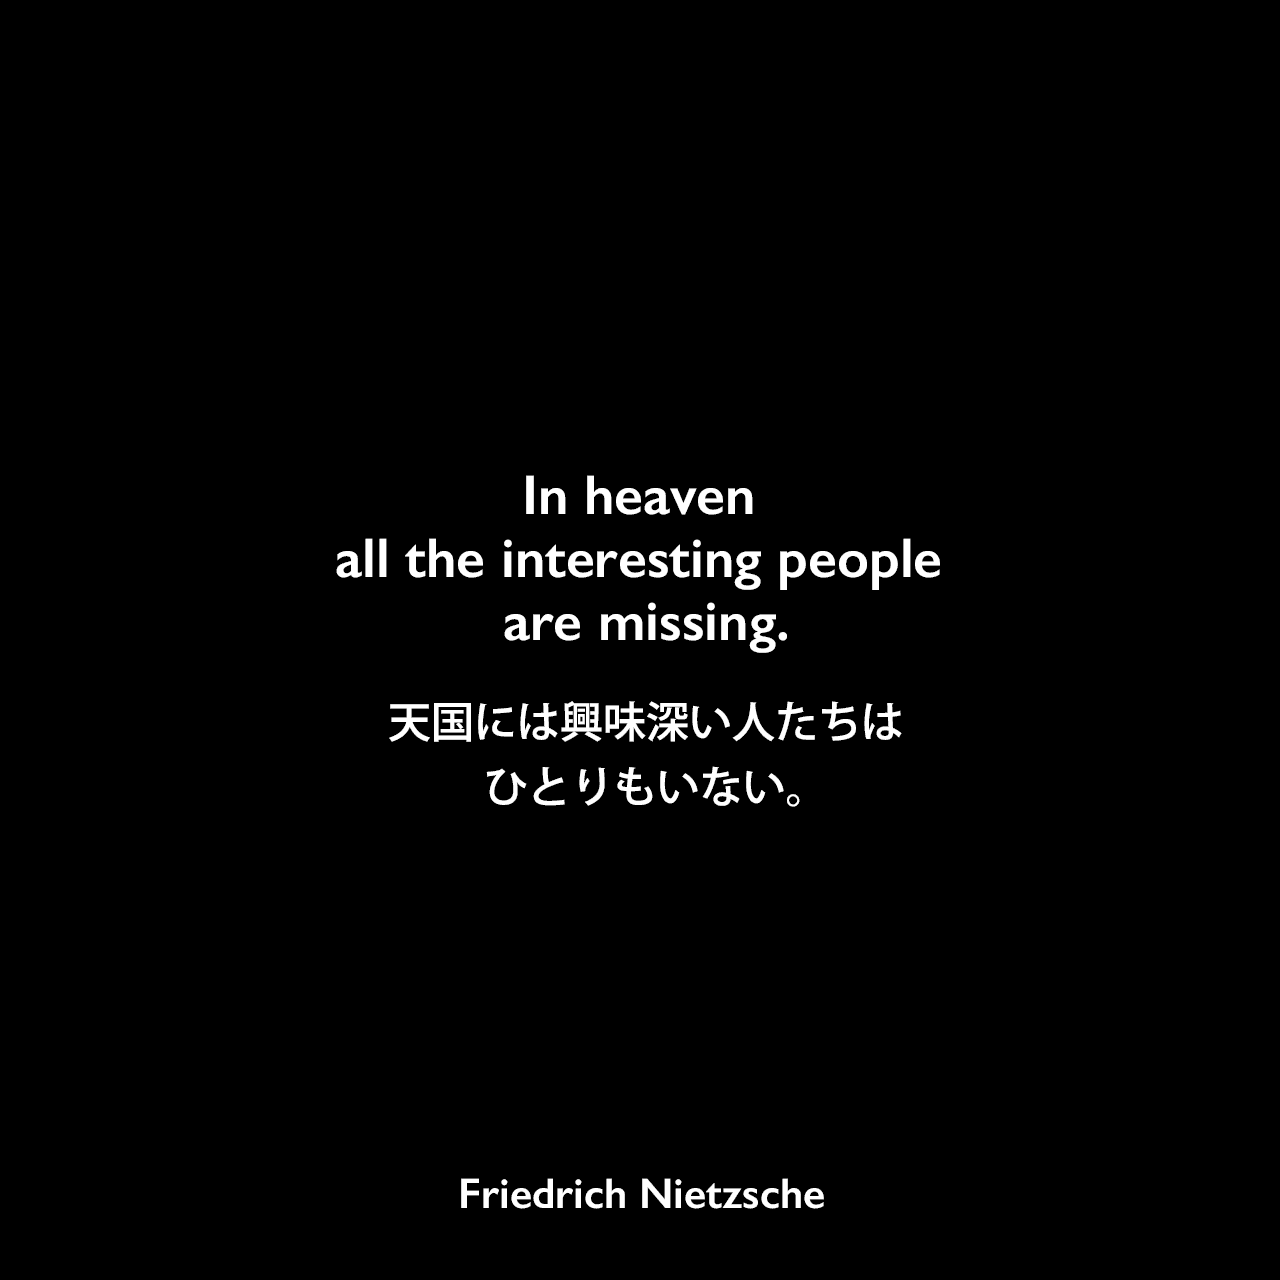 In heaven all the interesting people are missing.天国には興味深い人たちはひとりもいない。Friedrich Nietzsche